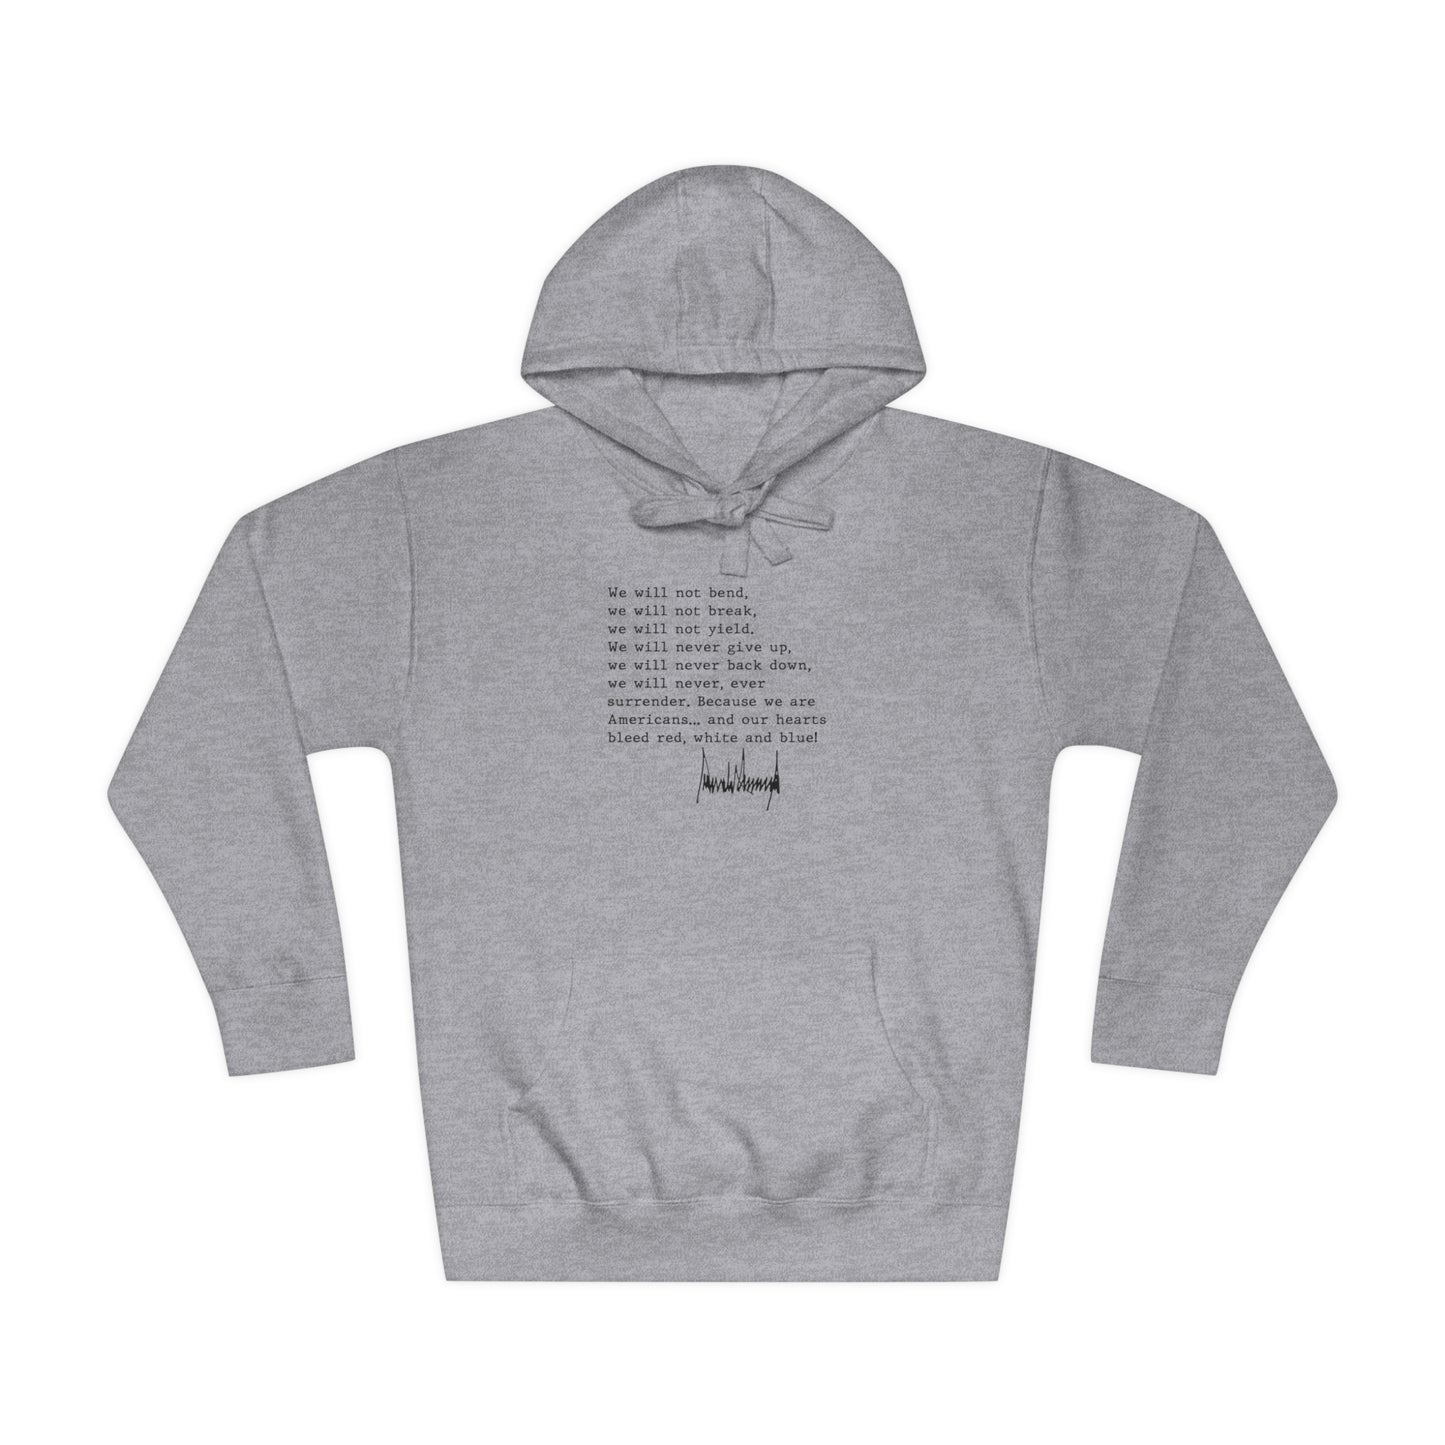 We Will Not Bend (black text) Unisex Hoodie